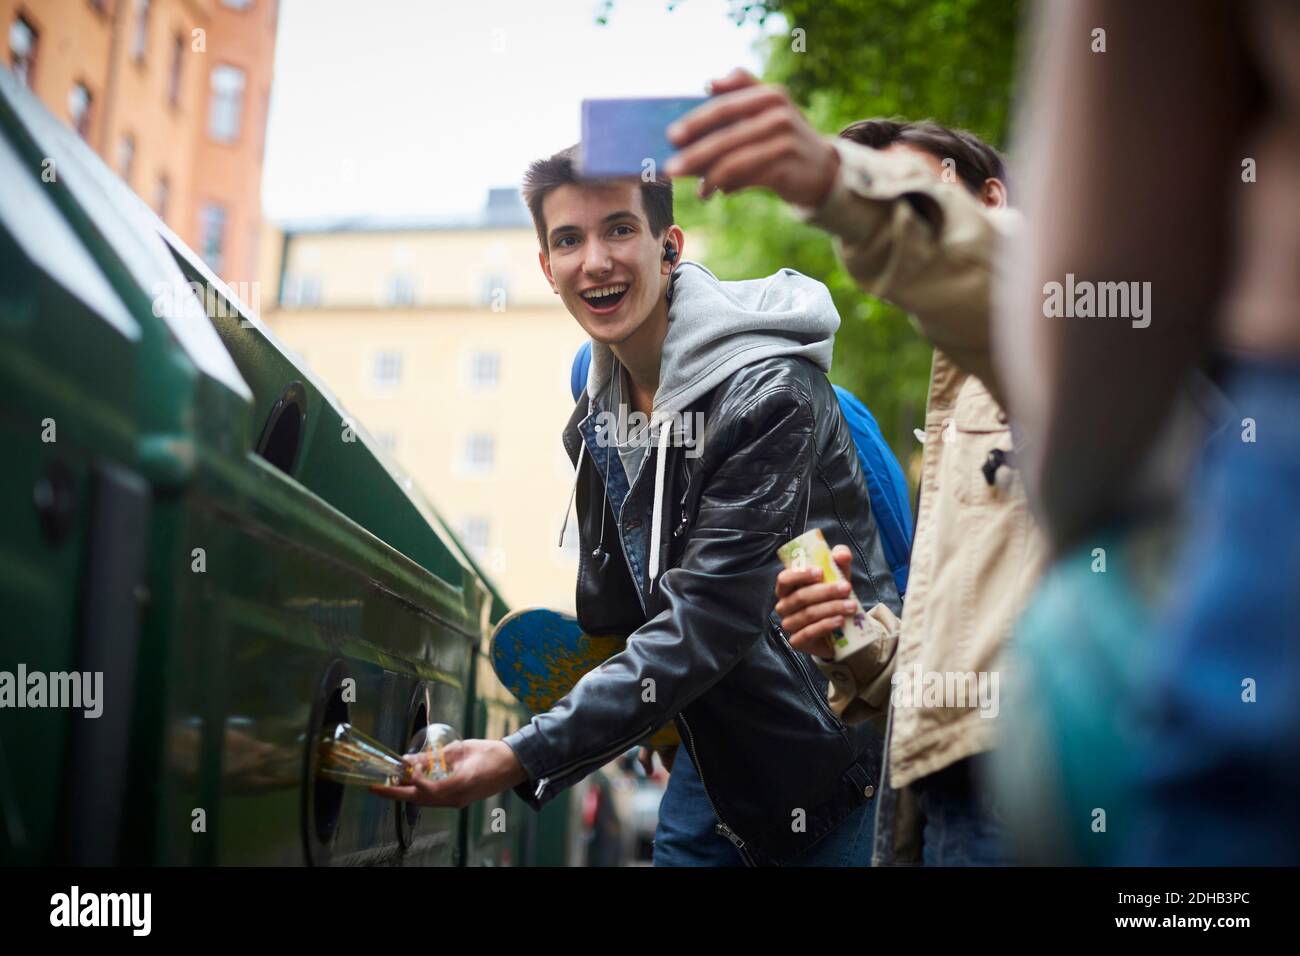 Man taking selfie with teenage friend throwing waste in garbage bin at recycling station Stock Photo